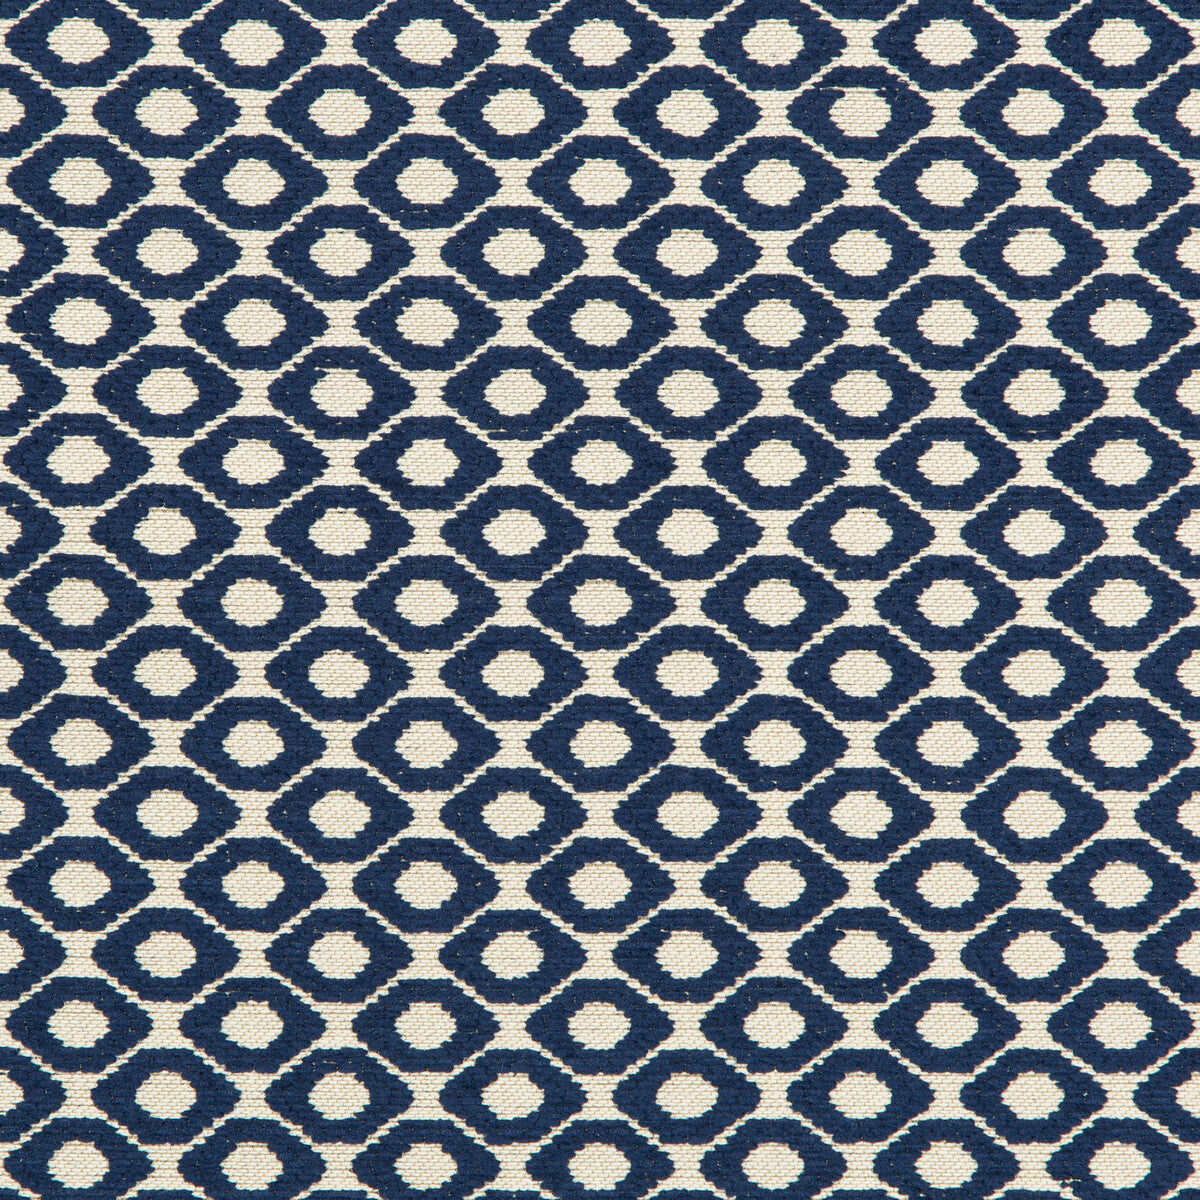 Pave The Way fabric in sapphire color - pattern 35867.50.0 - by Kravet Contract in the Gis Crypton collection